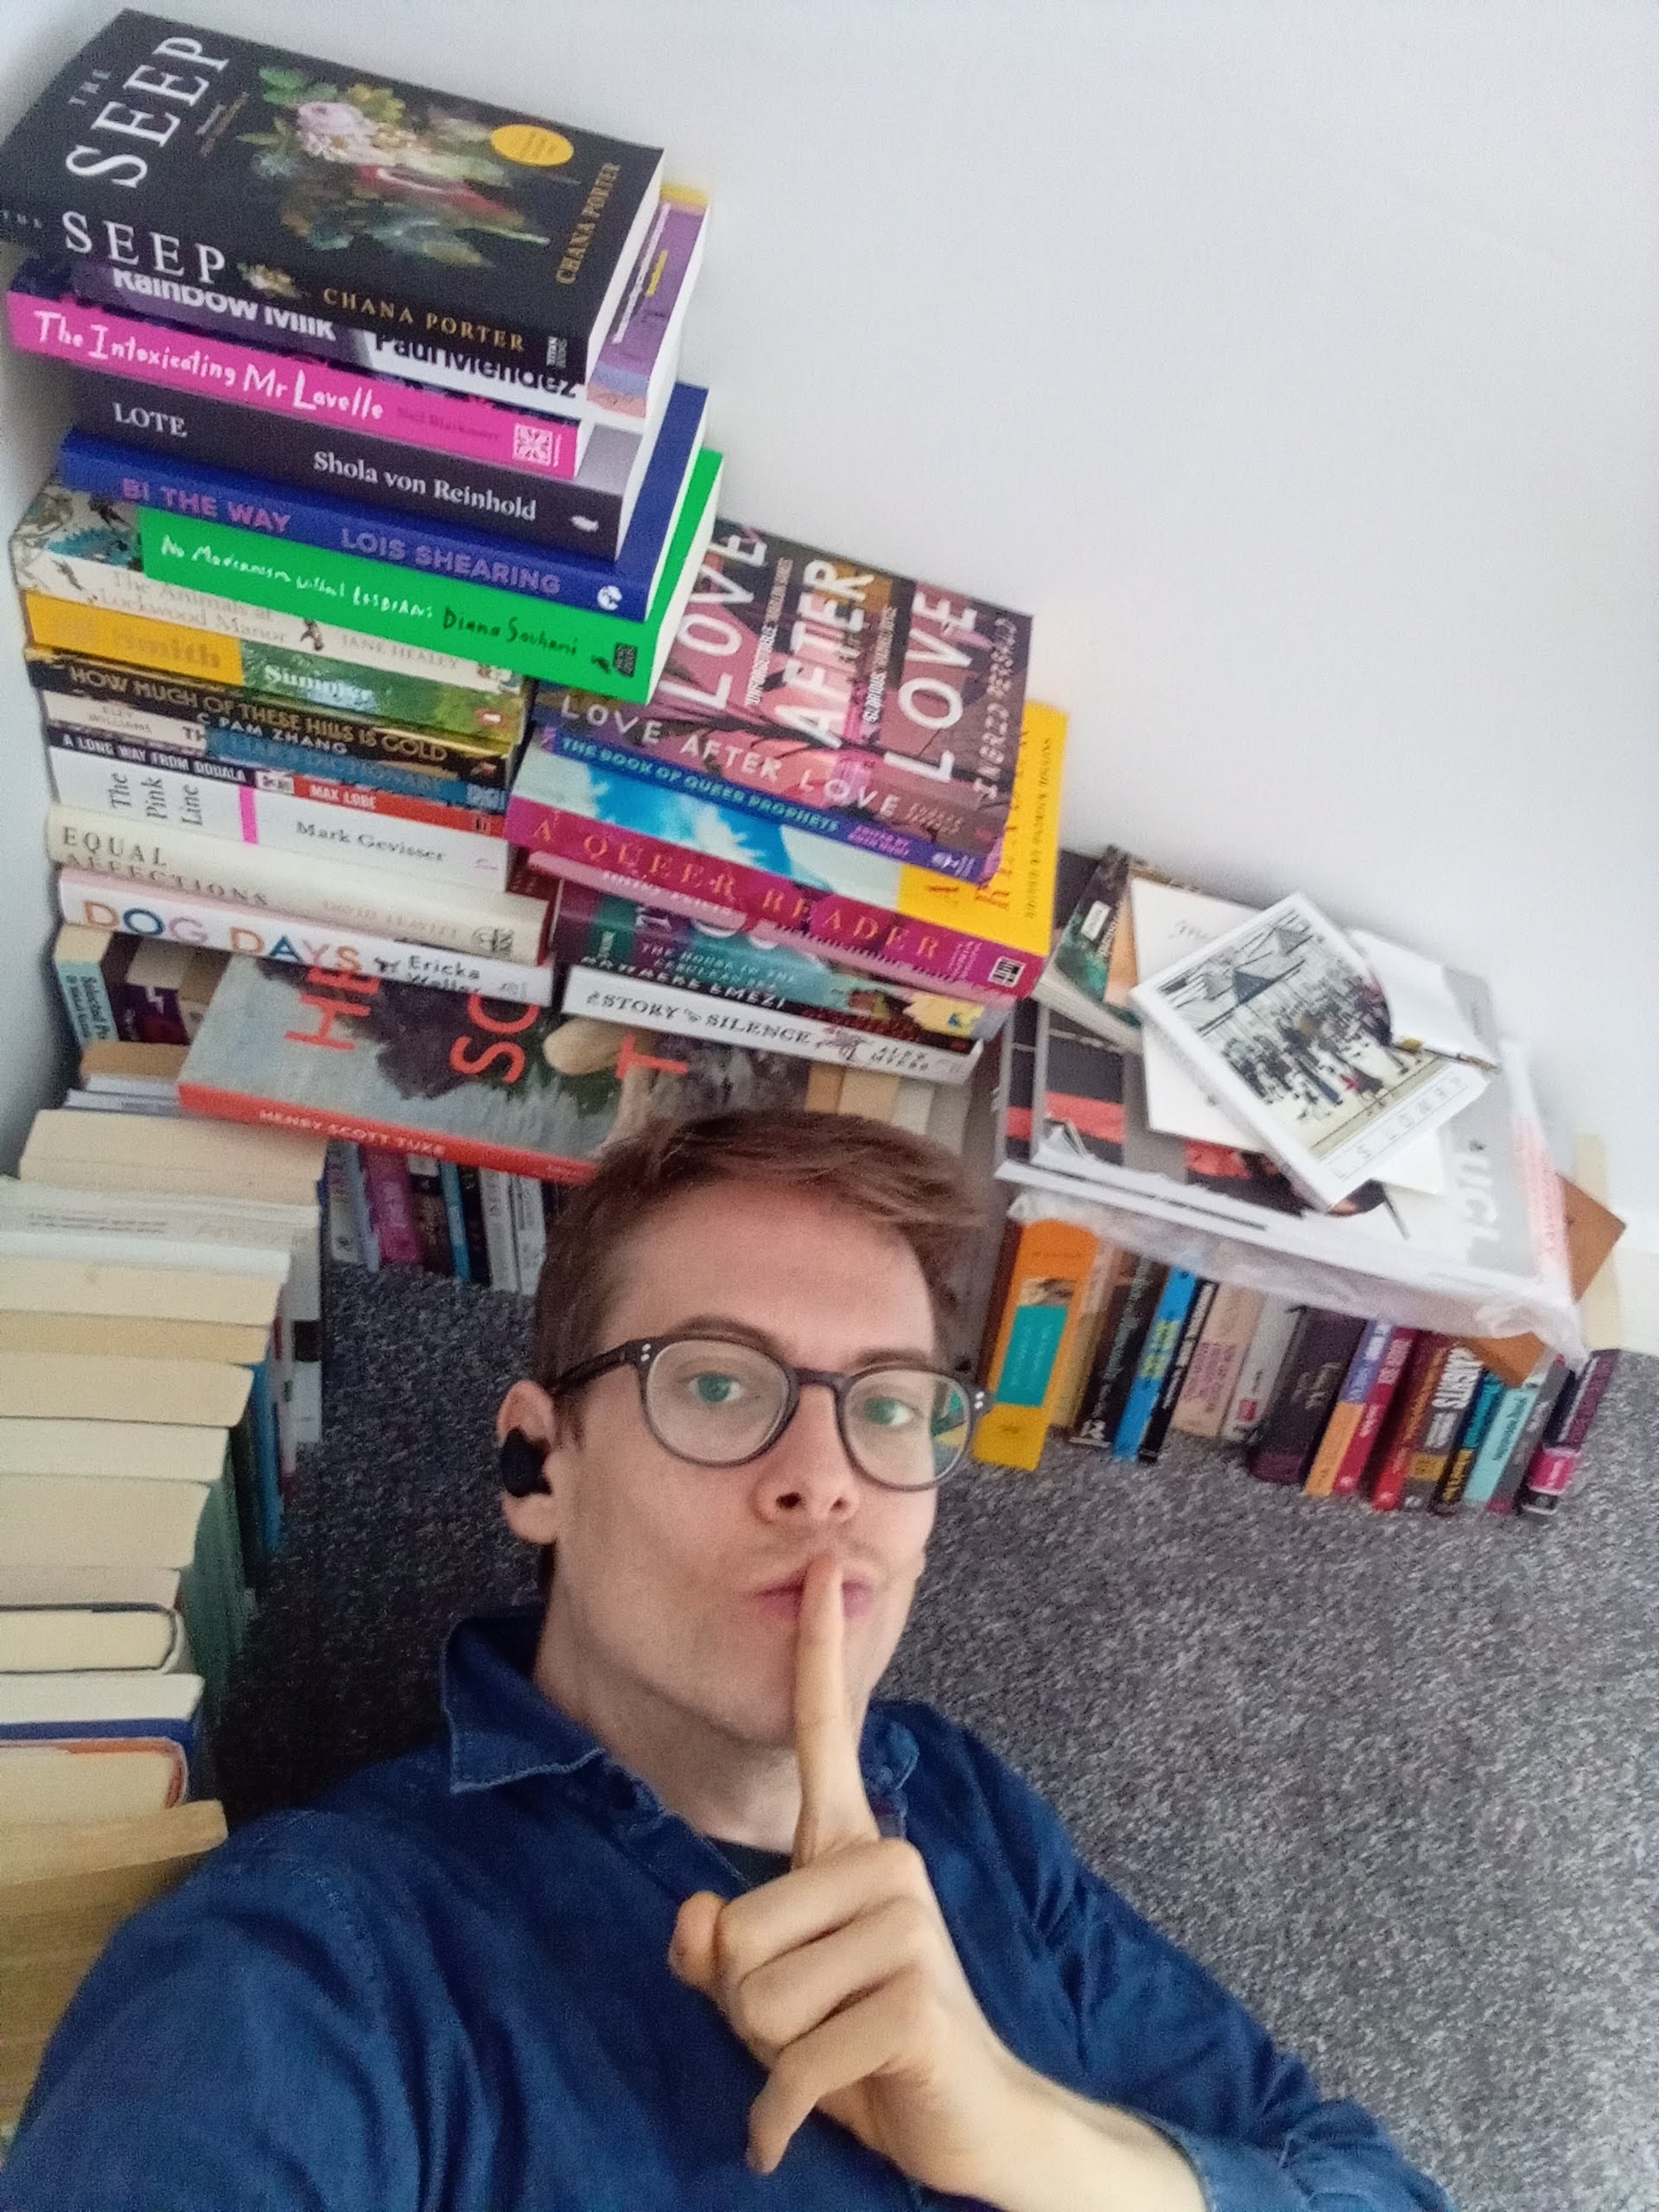 Jorik (a thirty-three year old wearing glasses, a faded blue shirt and wireless earbuds) is lying down next to a handsome stack of books, all queer, while pursing his lips and holding his finger in a 'shhh' motion.